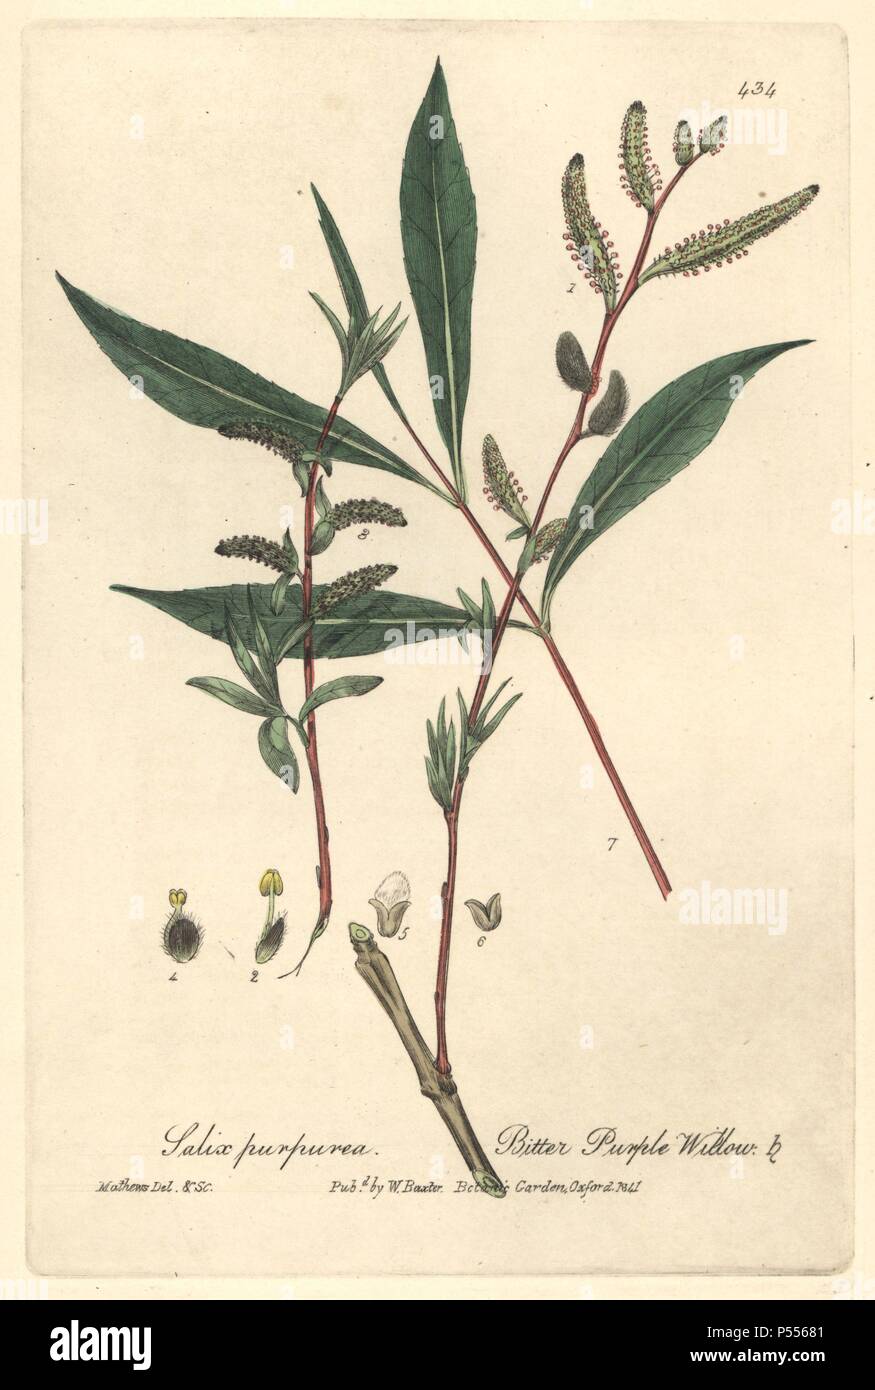 Bitter purple willow, Salix purpurea. Handcoloured copperplate drawn and engraved by Charles Mathews from William Baxter's 'British Phaenogamous Botany,' Oxford, 1841. Scotsman William Baxter (1788-1871) was the curator of the Oxford Botanic Garden from 1813 to 1854. Stock Photo